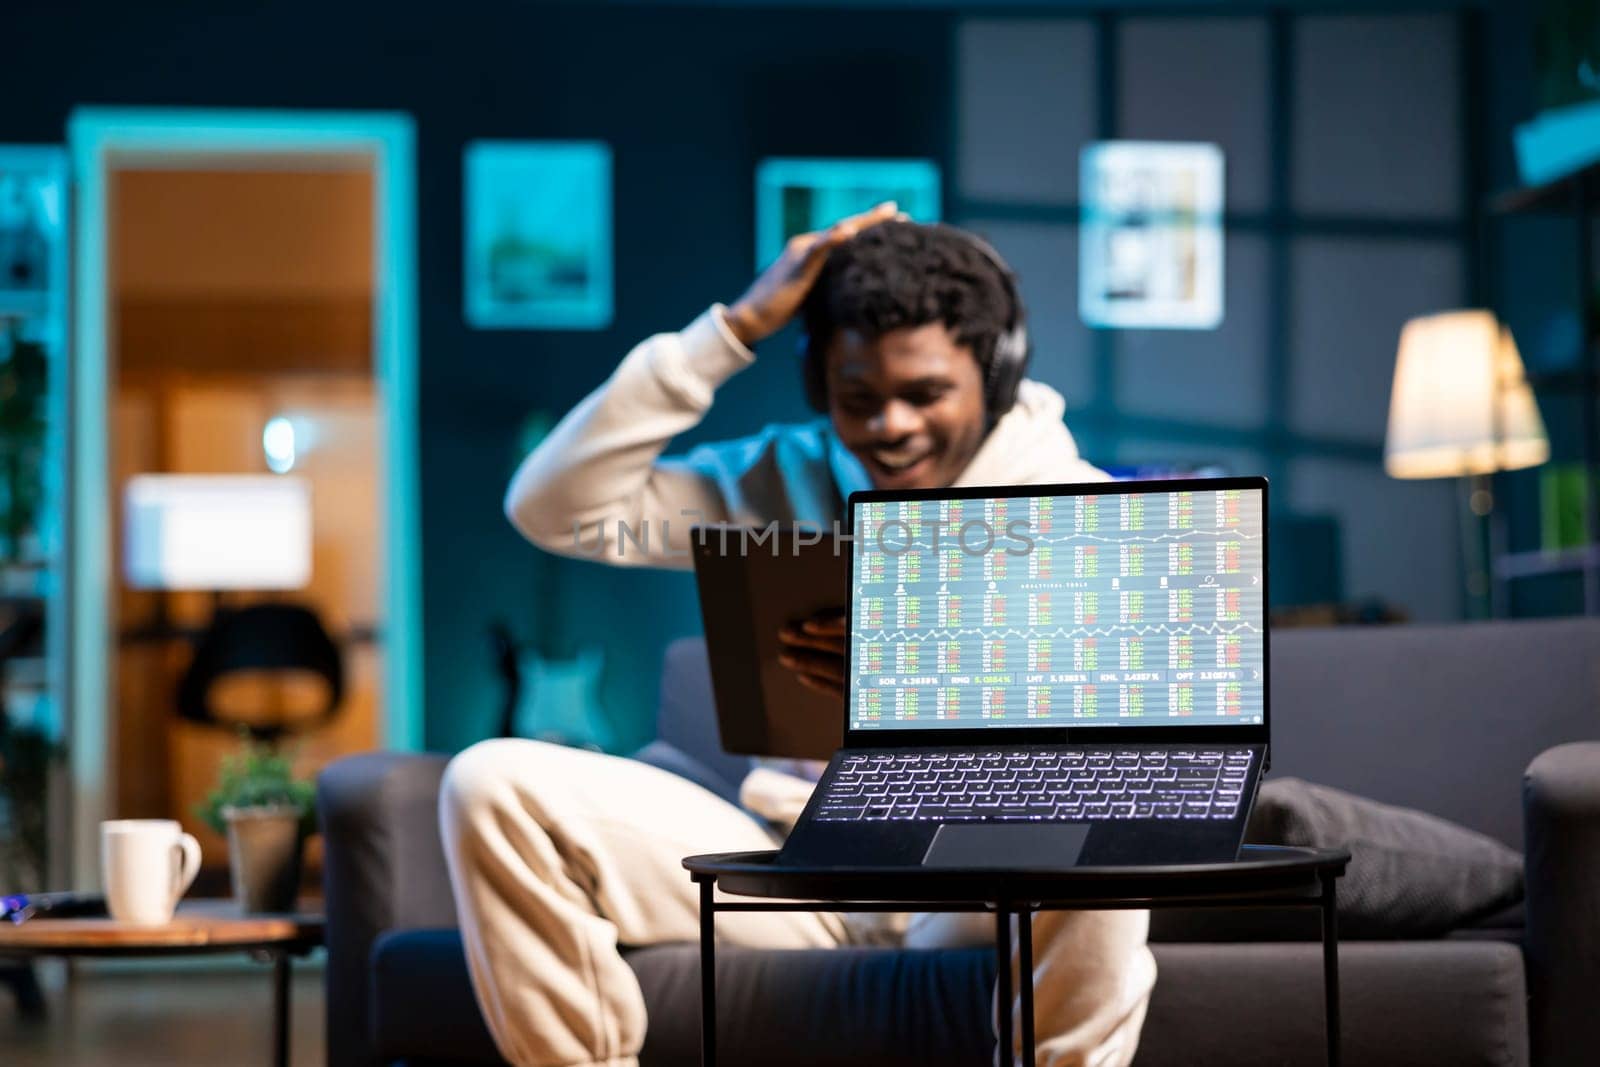 Smiling freelancer wearing headphones, analyzing investments on tablet, focus on stock market figures on laptop screen. Excited broker trader celebrating profit on trading charts